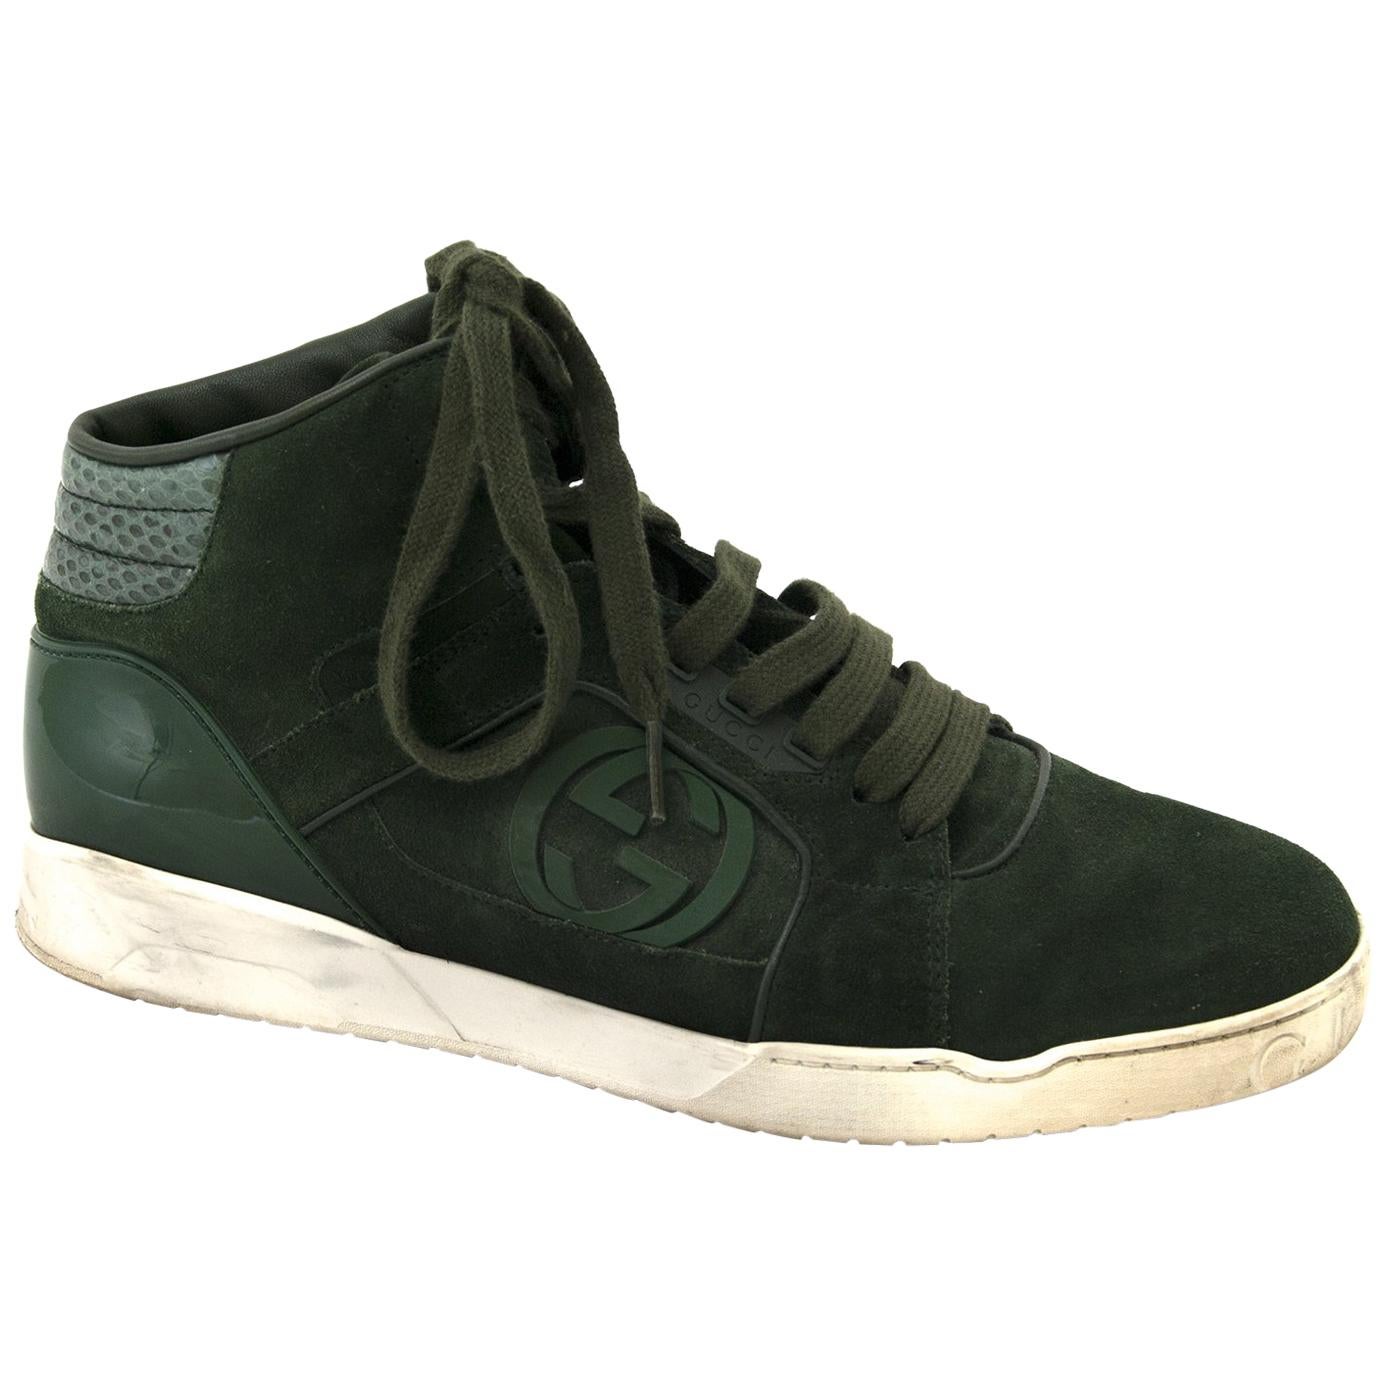 Gucci Men's Green Hitop Trainer with Interlocking G Detail - size 41